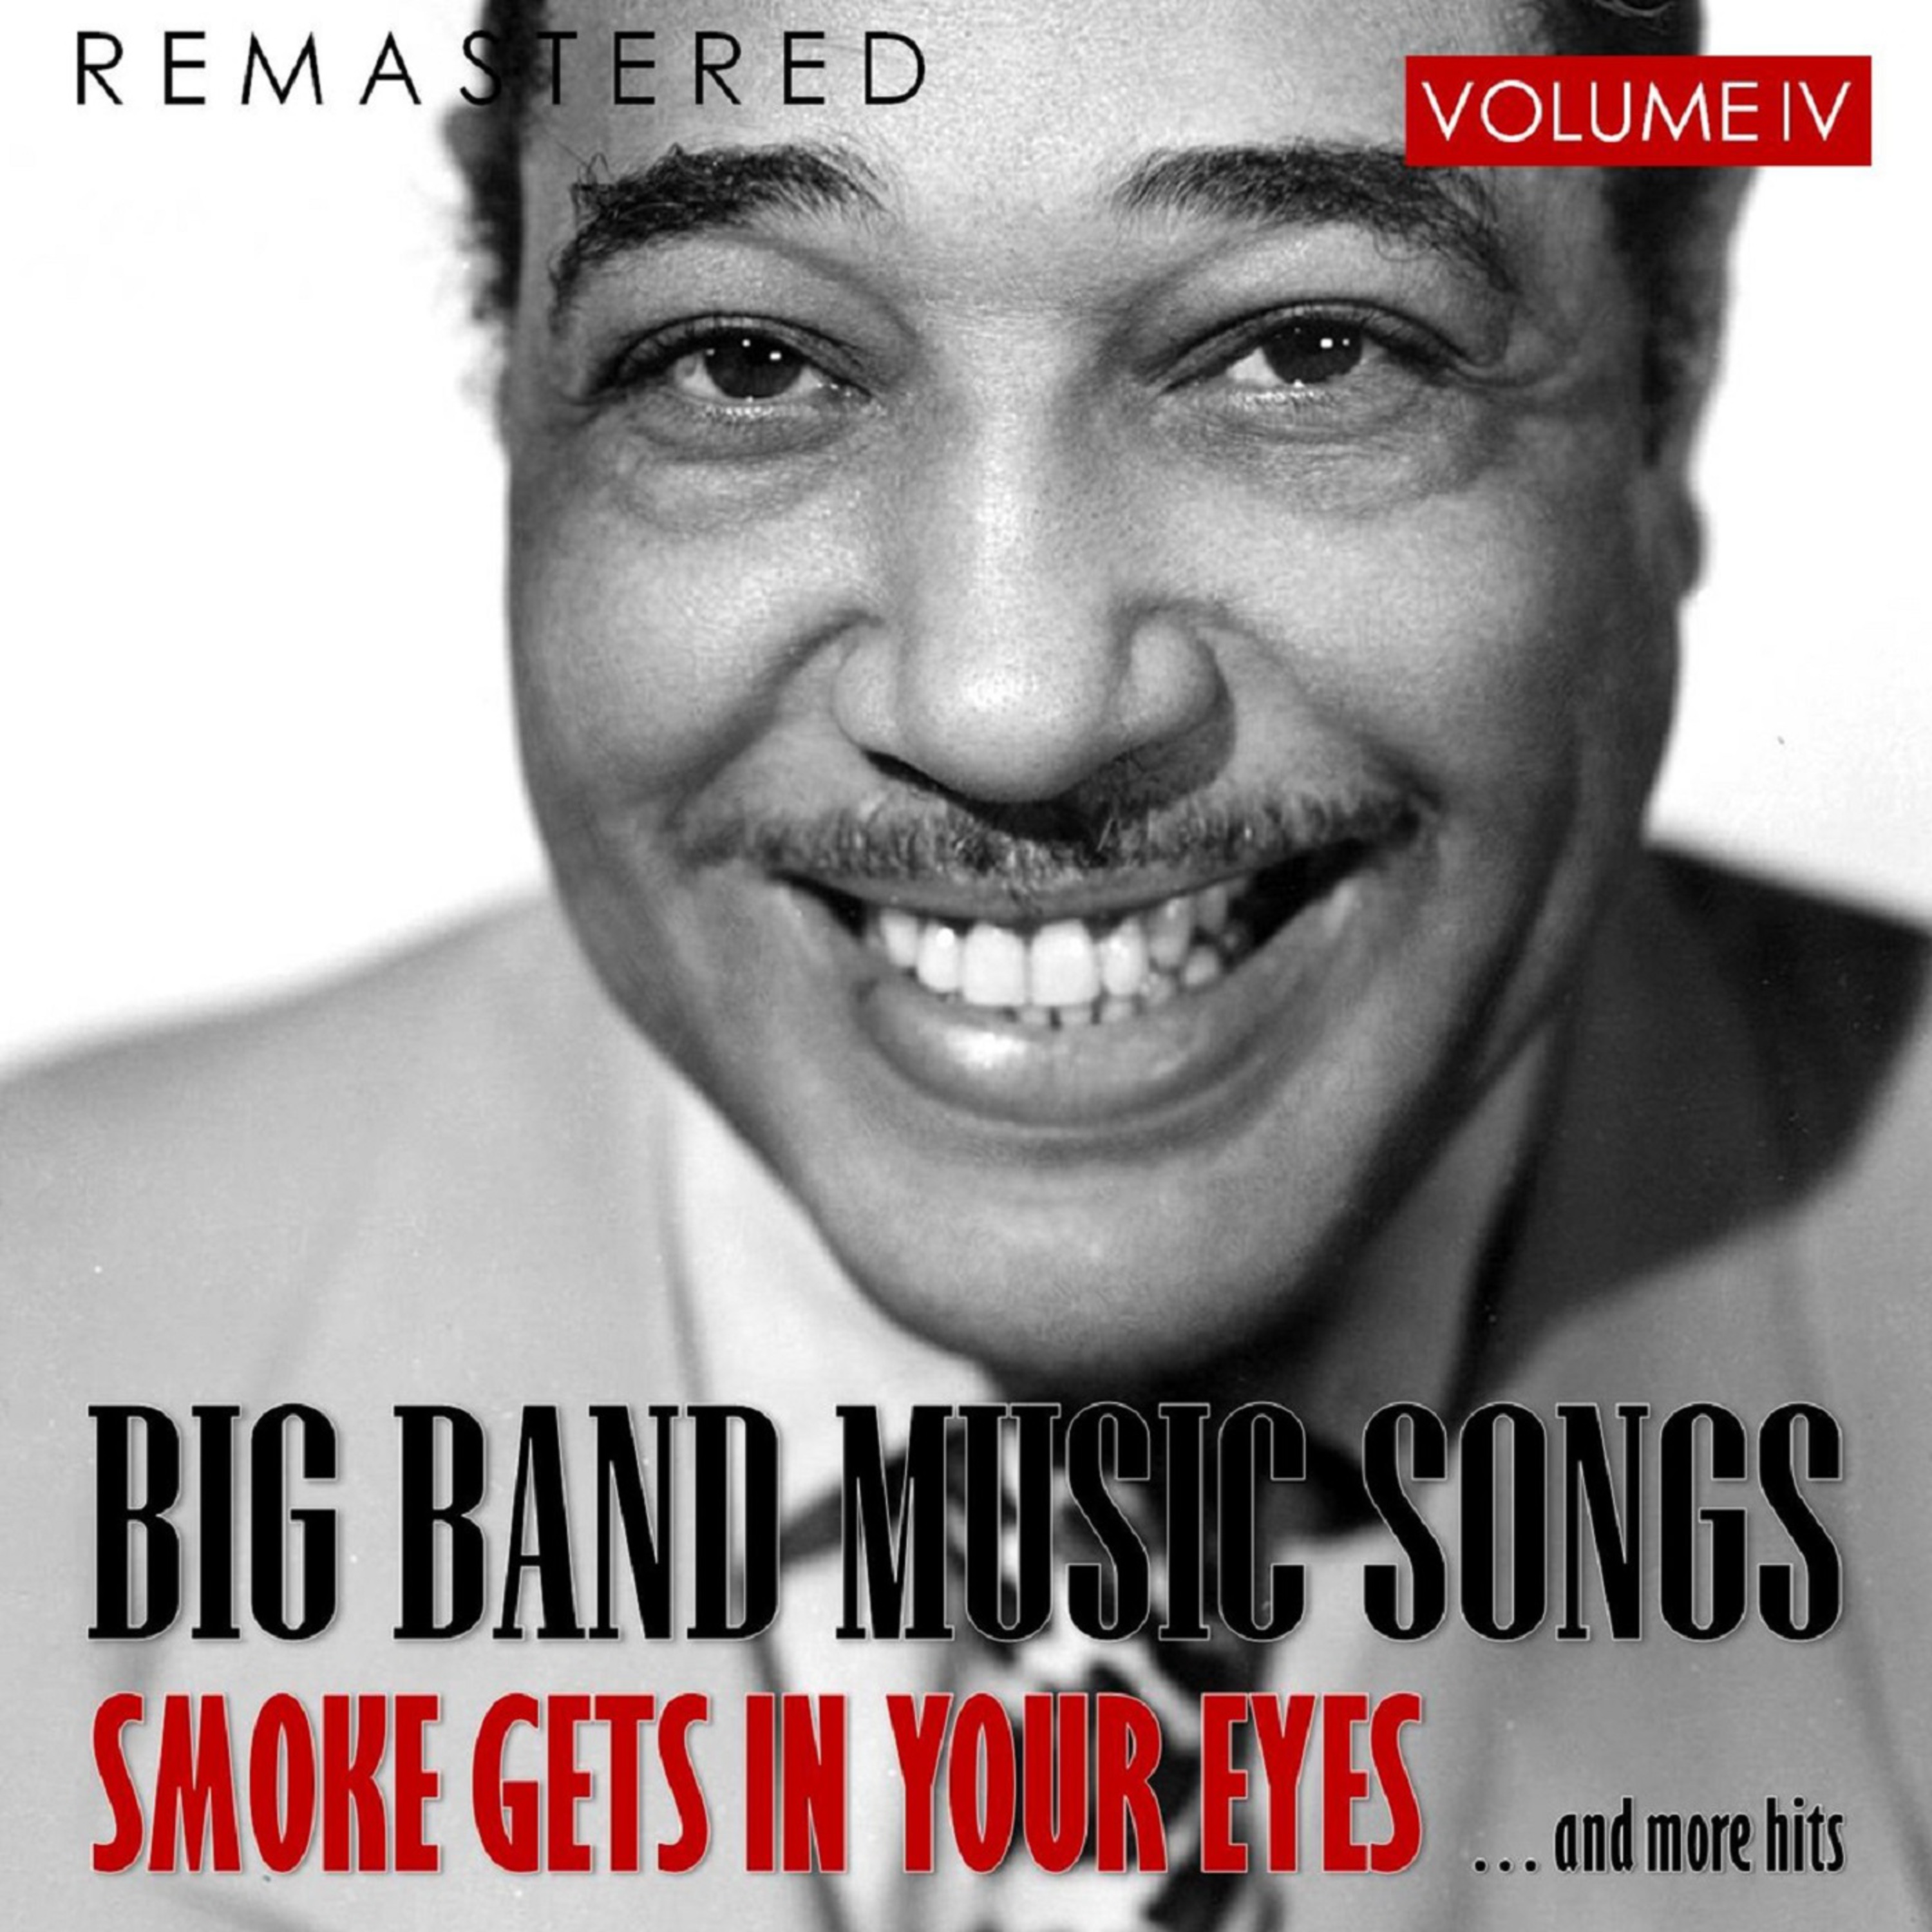 Big Band Music Songs Vol. 4 - Smoke Gets in Your Eyes.... and More Hits (Remastered)